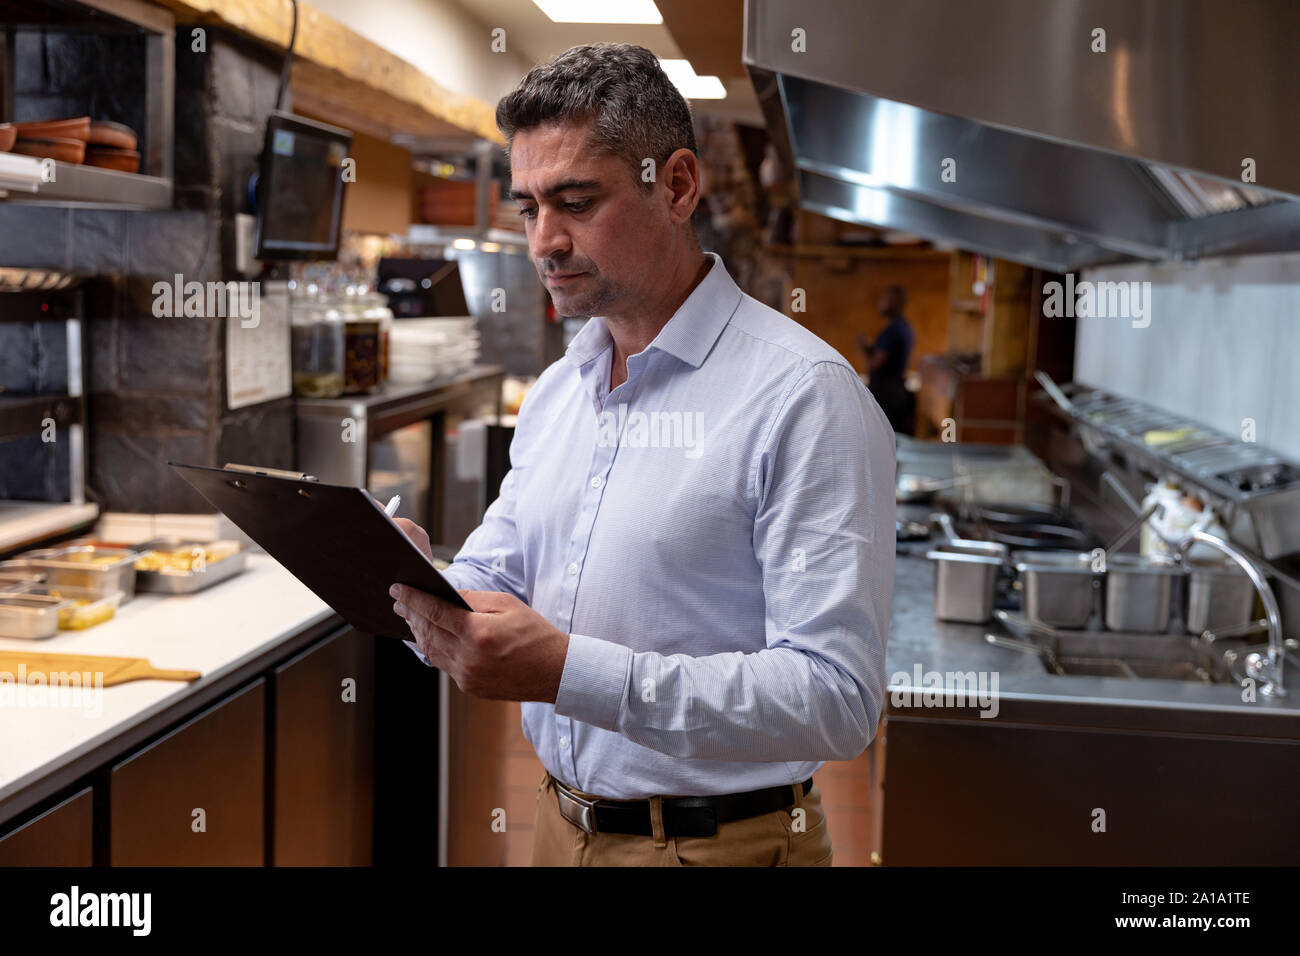 Restaurant manager holding a clipboard in a kitchen Stock Photo